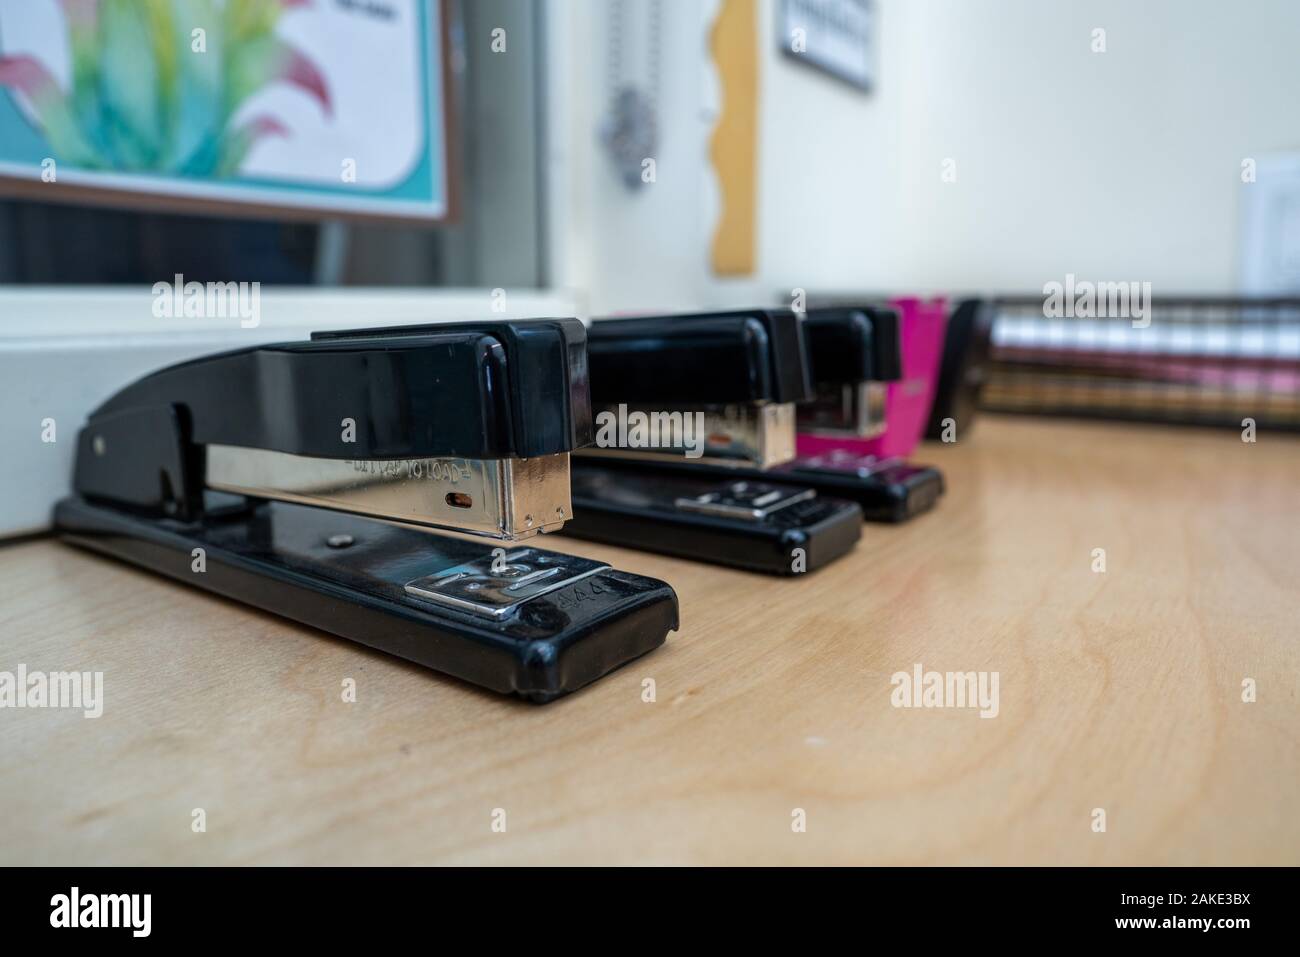 Row of black staplers and tape dispensers sitting on table in office environment Stock Photo